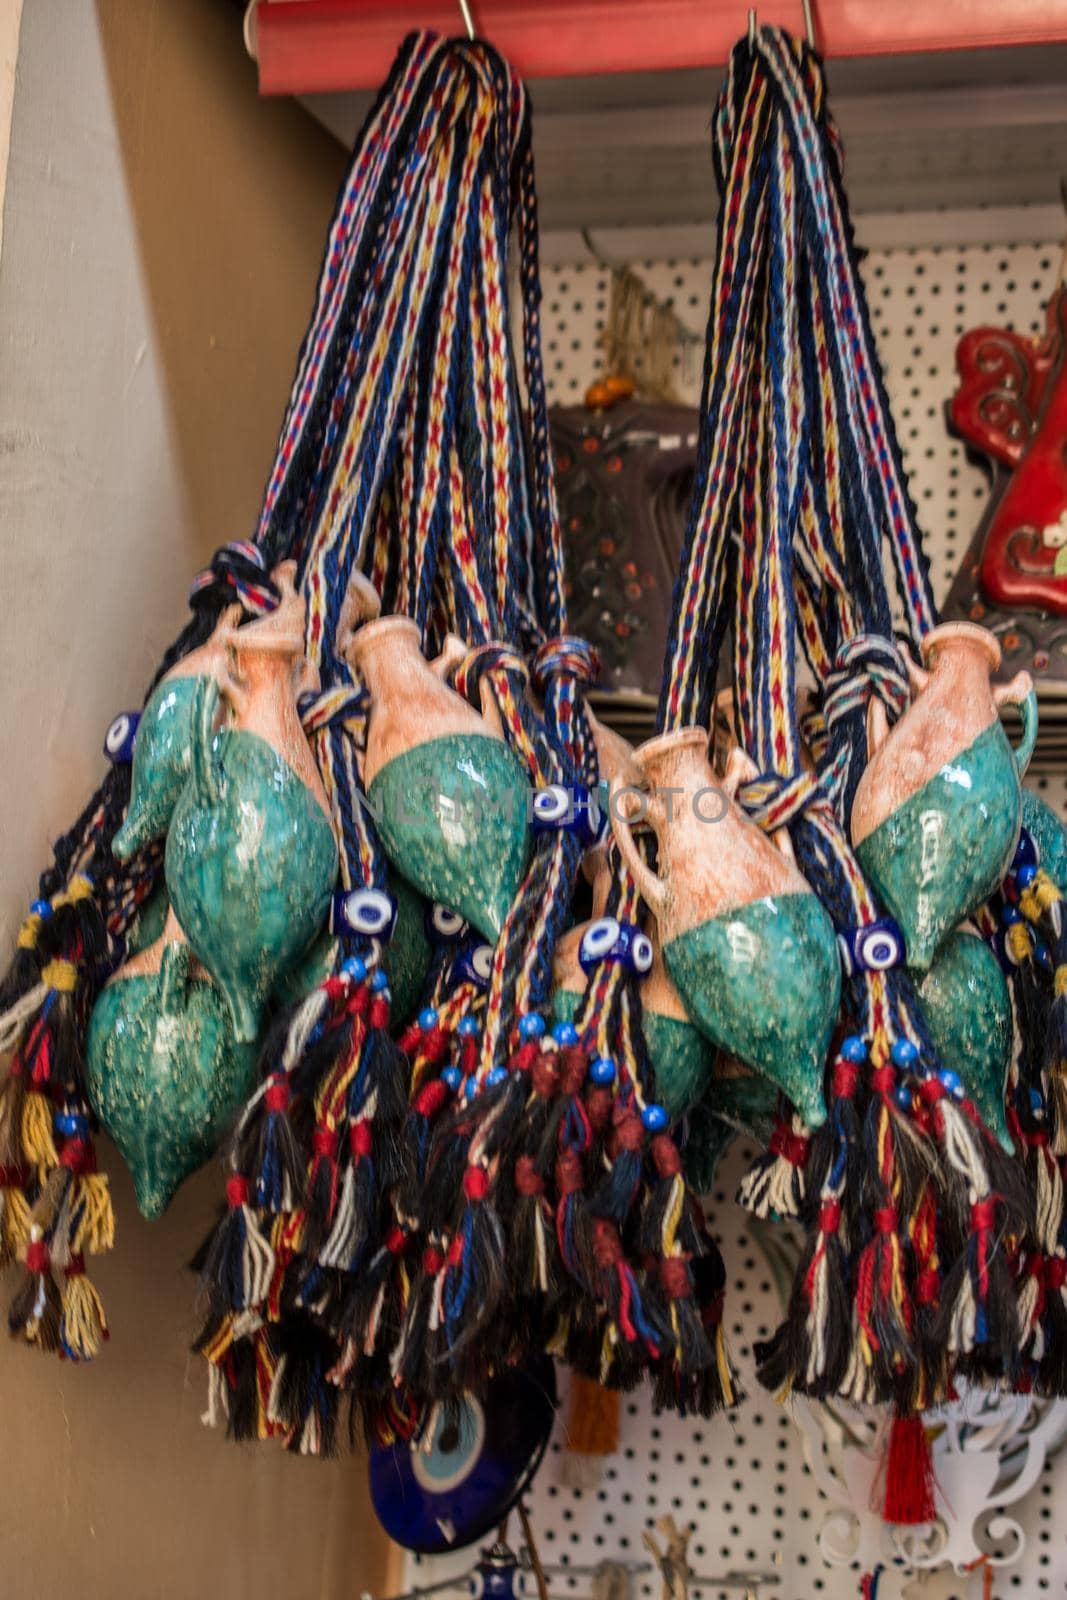 Miniature clay pitchers hanging in a store on display